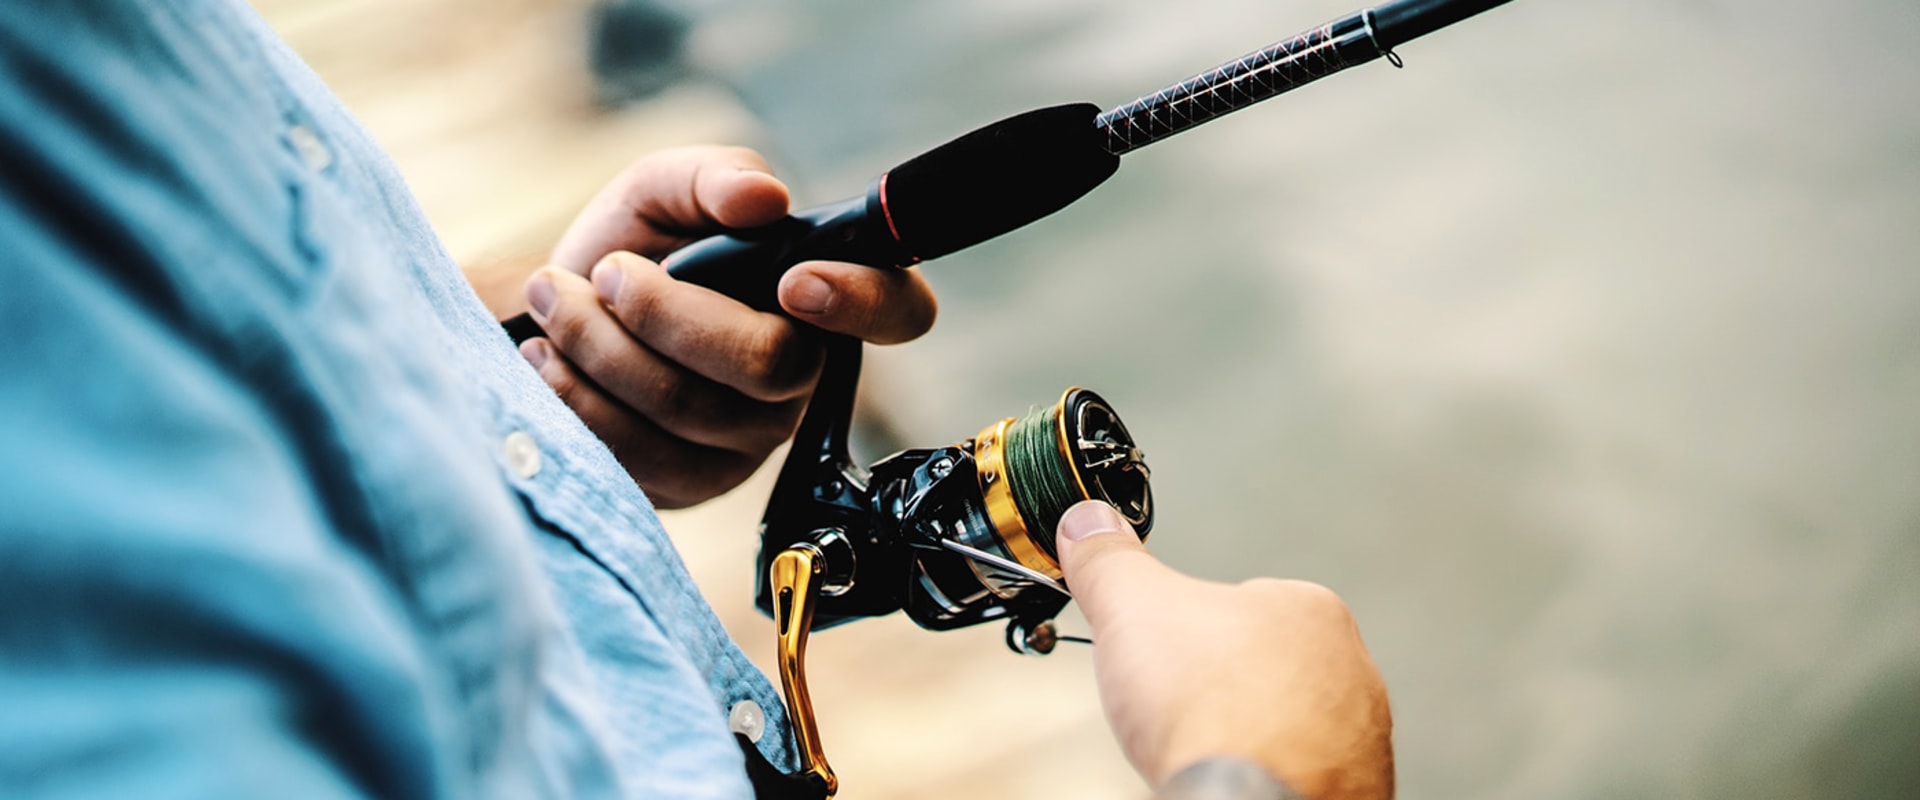 Why is Fishing an Expensive Hobby?